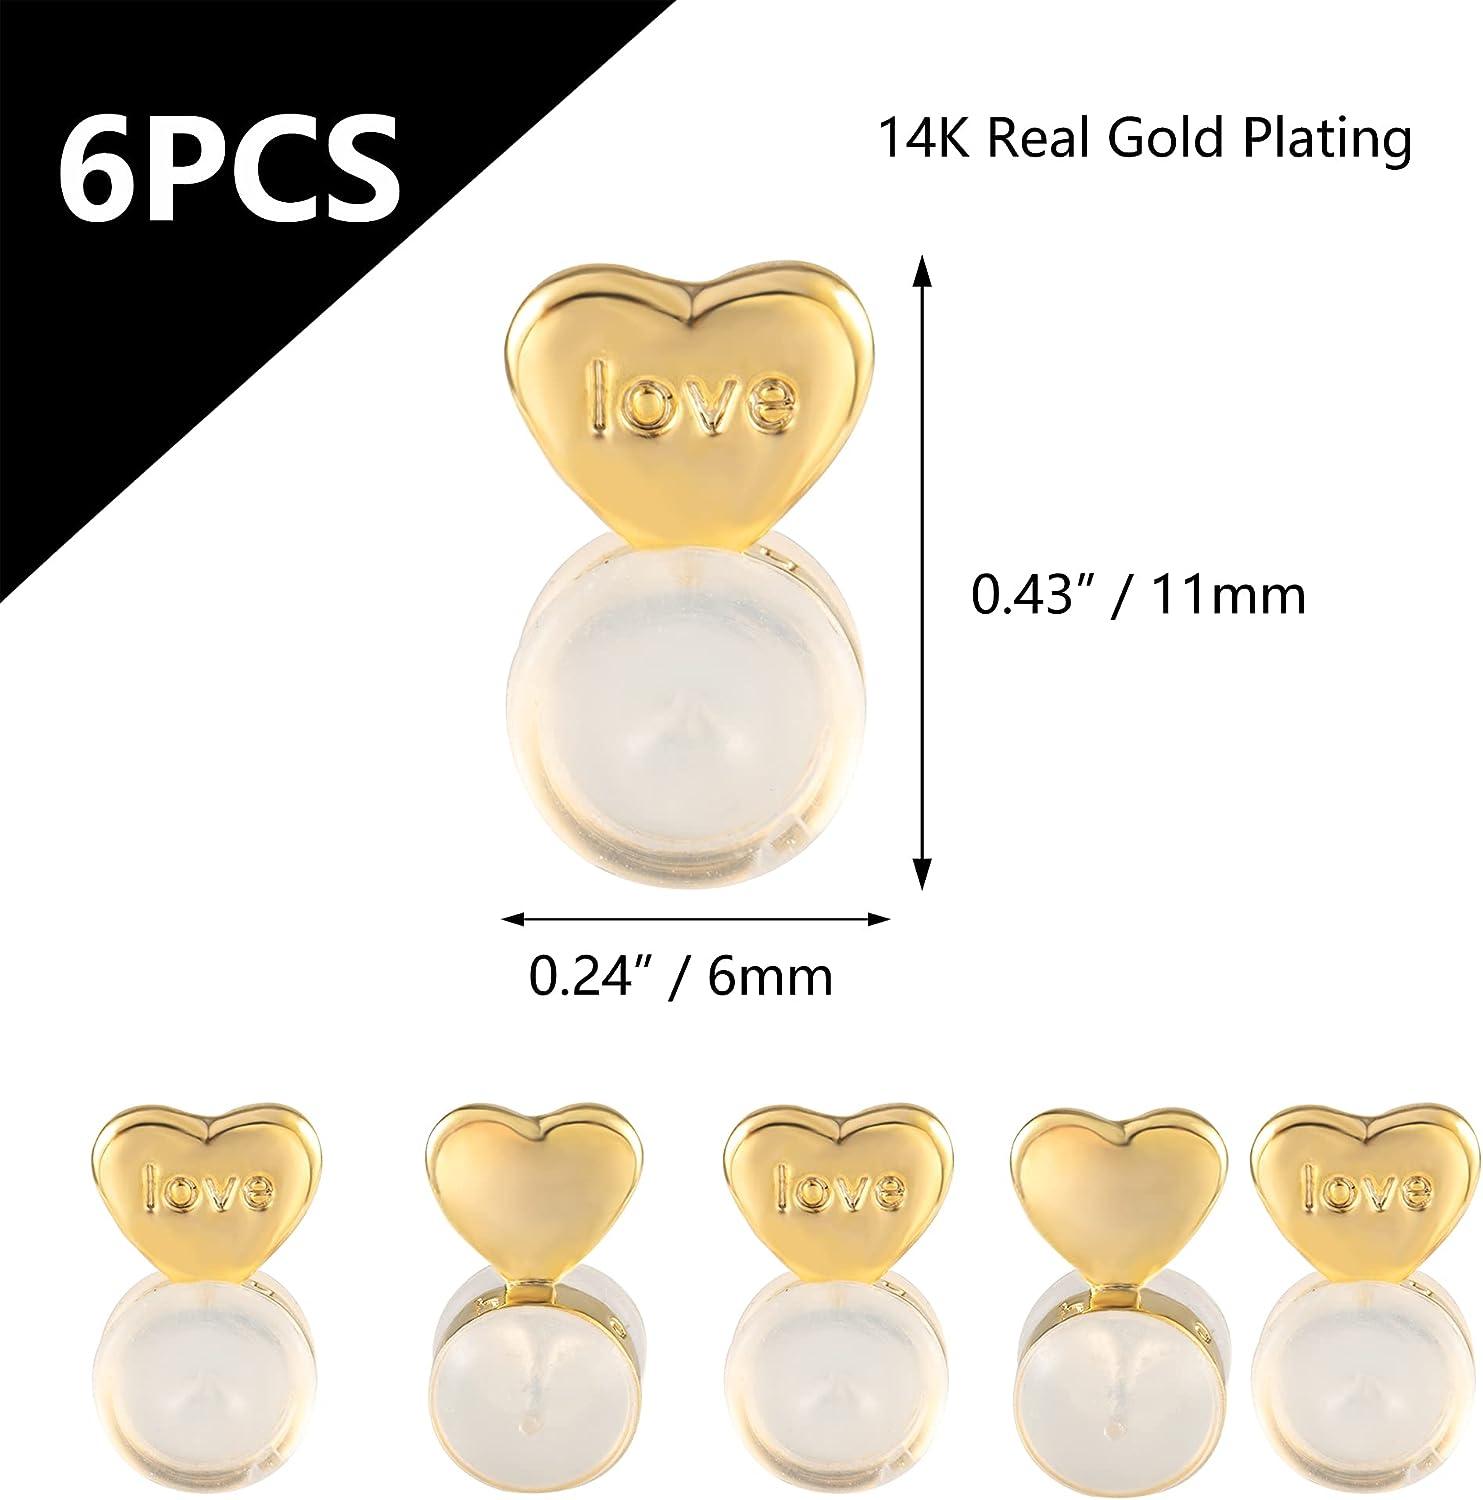 8 Pcs (4 Pairs) 14K Gold Filled 1/20 14K Yellow Gold Earring Backs. 4 Pairs Lead-Free and Nickle-Free Hypoallergenic Replacement Friction Secure